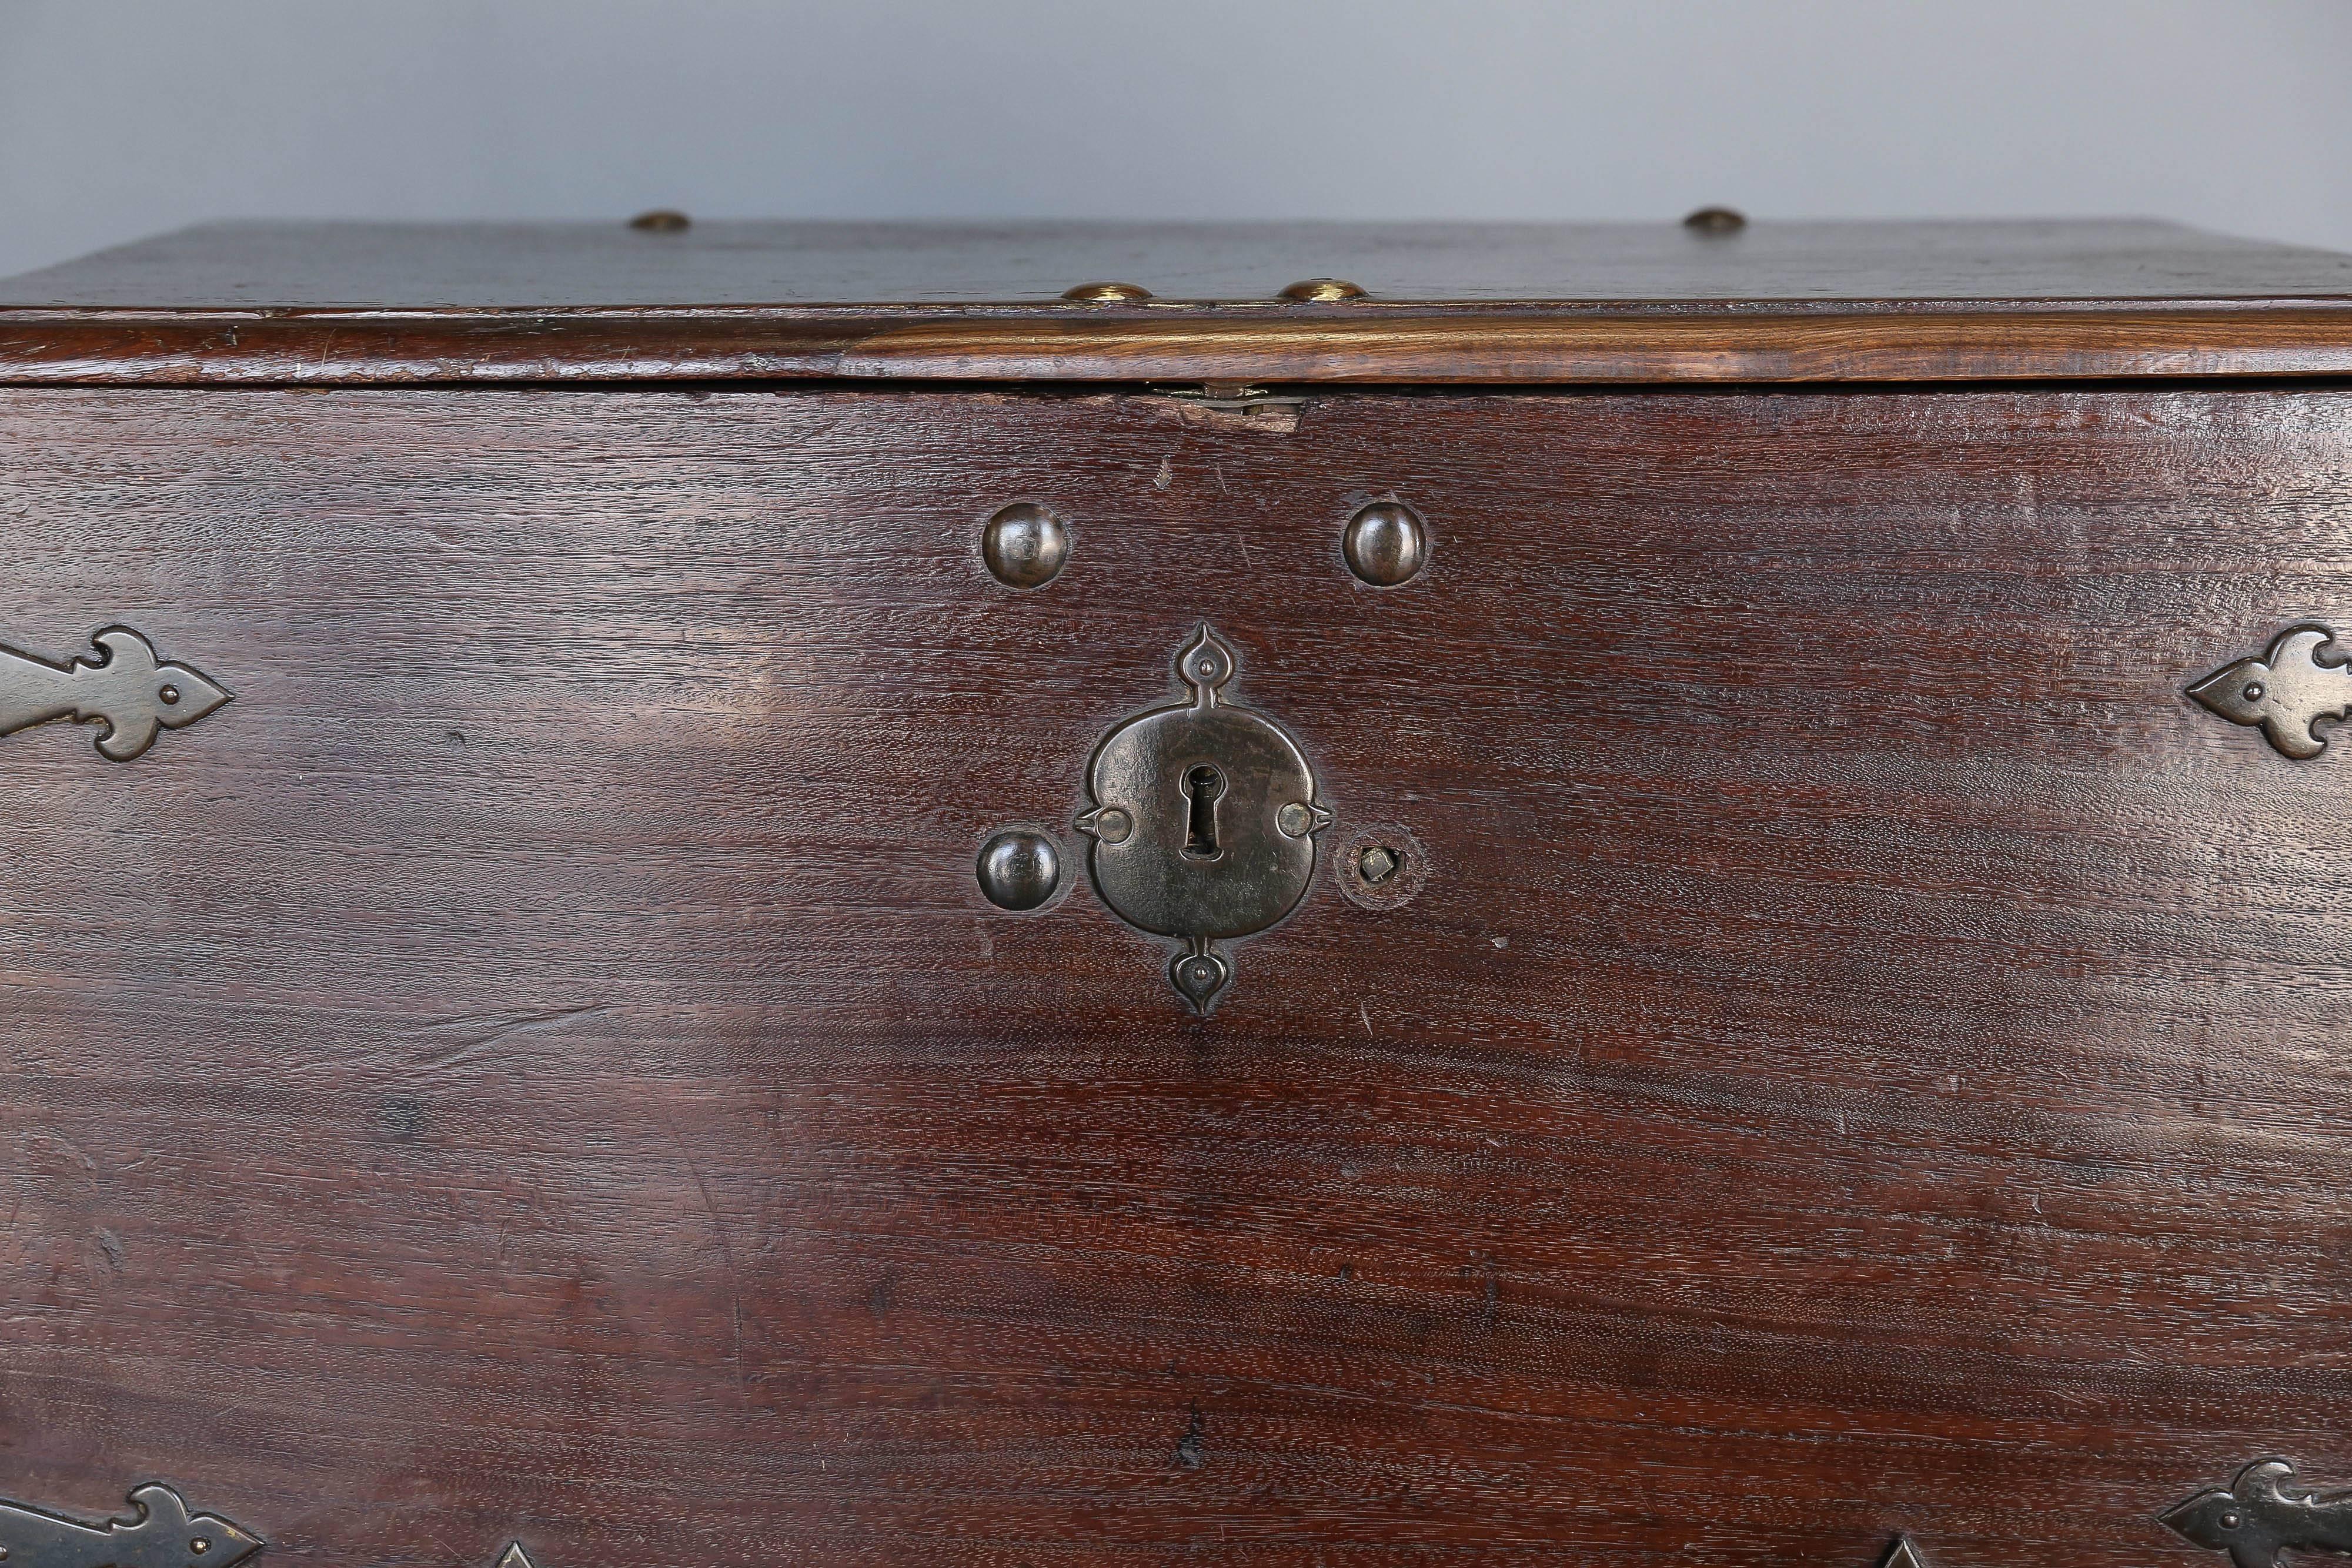 18th century Colonial Dutch chest on metal stand with original hand-wrought hardware. Beautiful handles on side of trunk with strap details in ironwork.